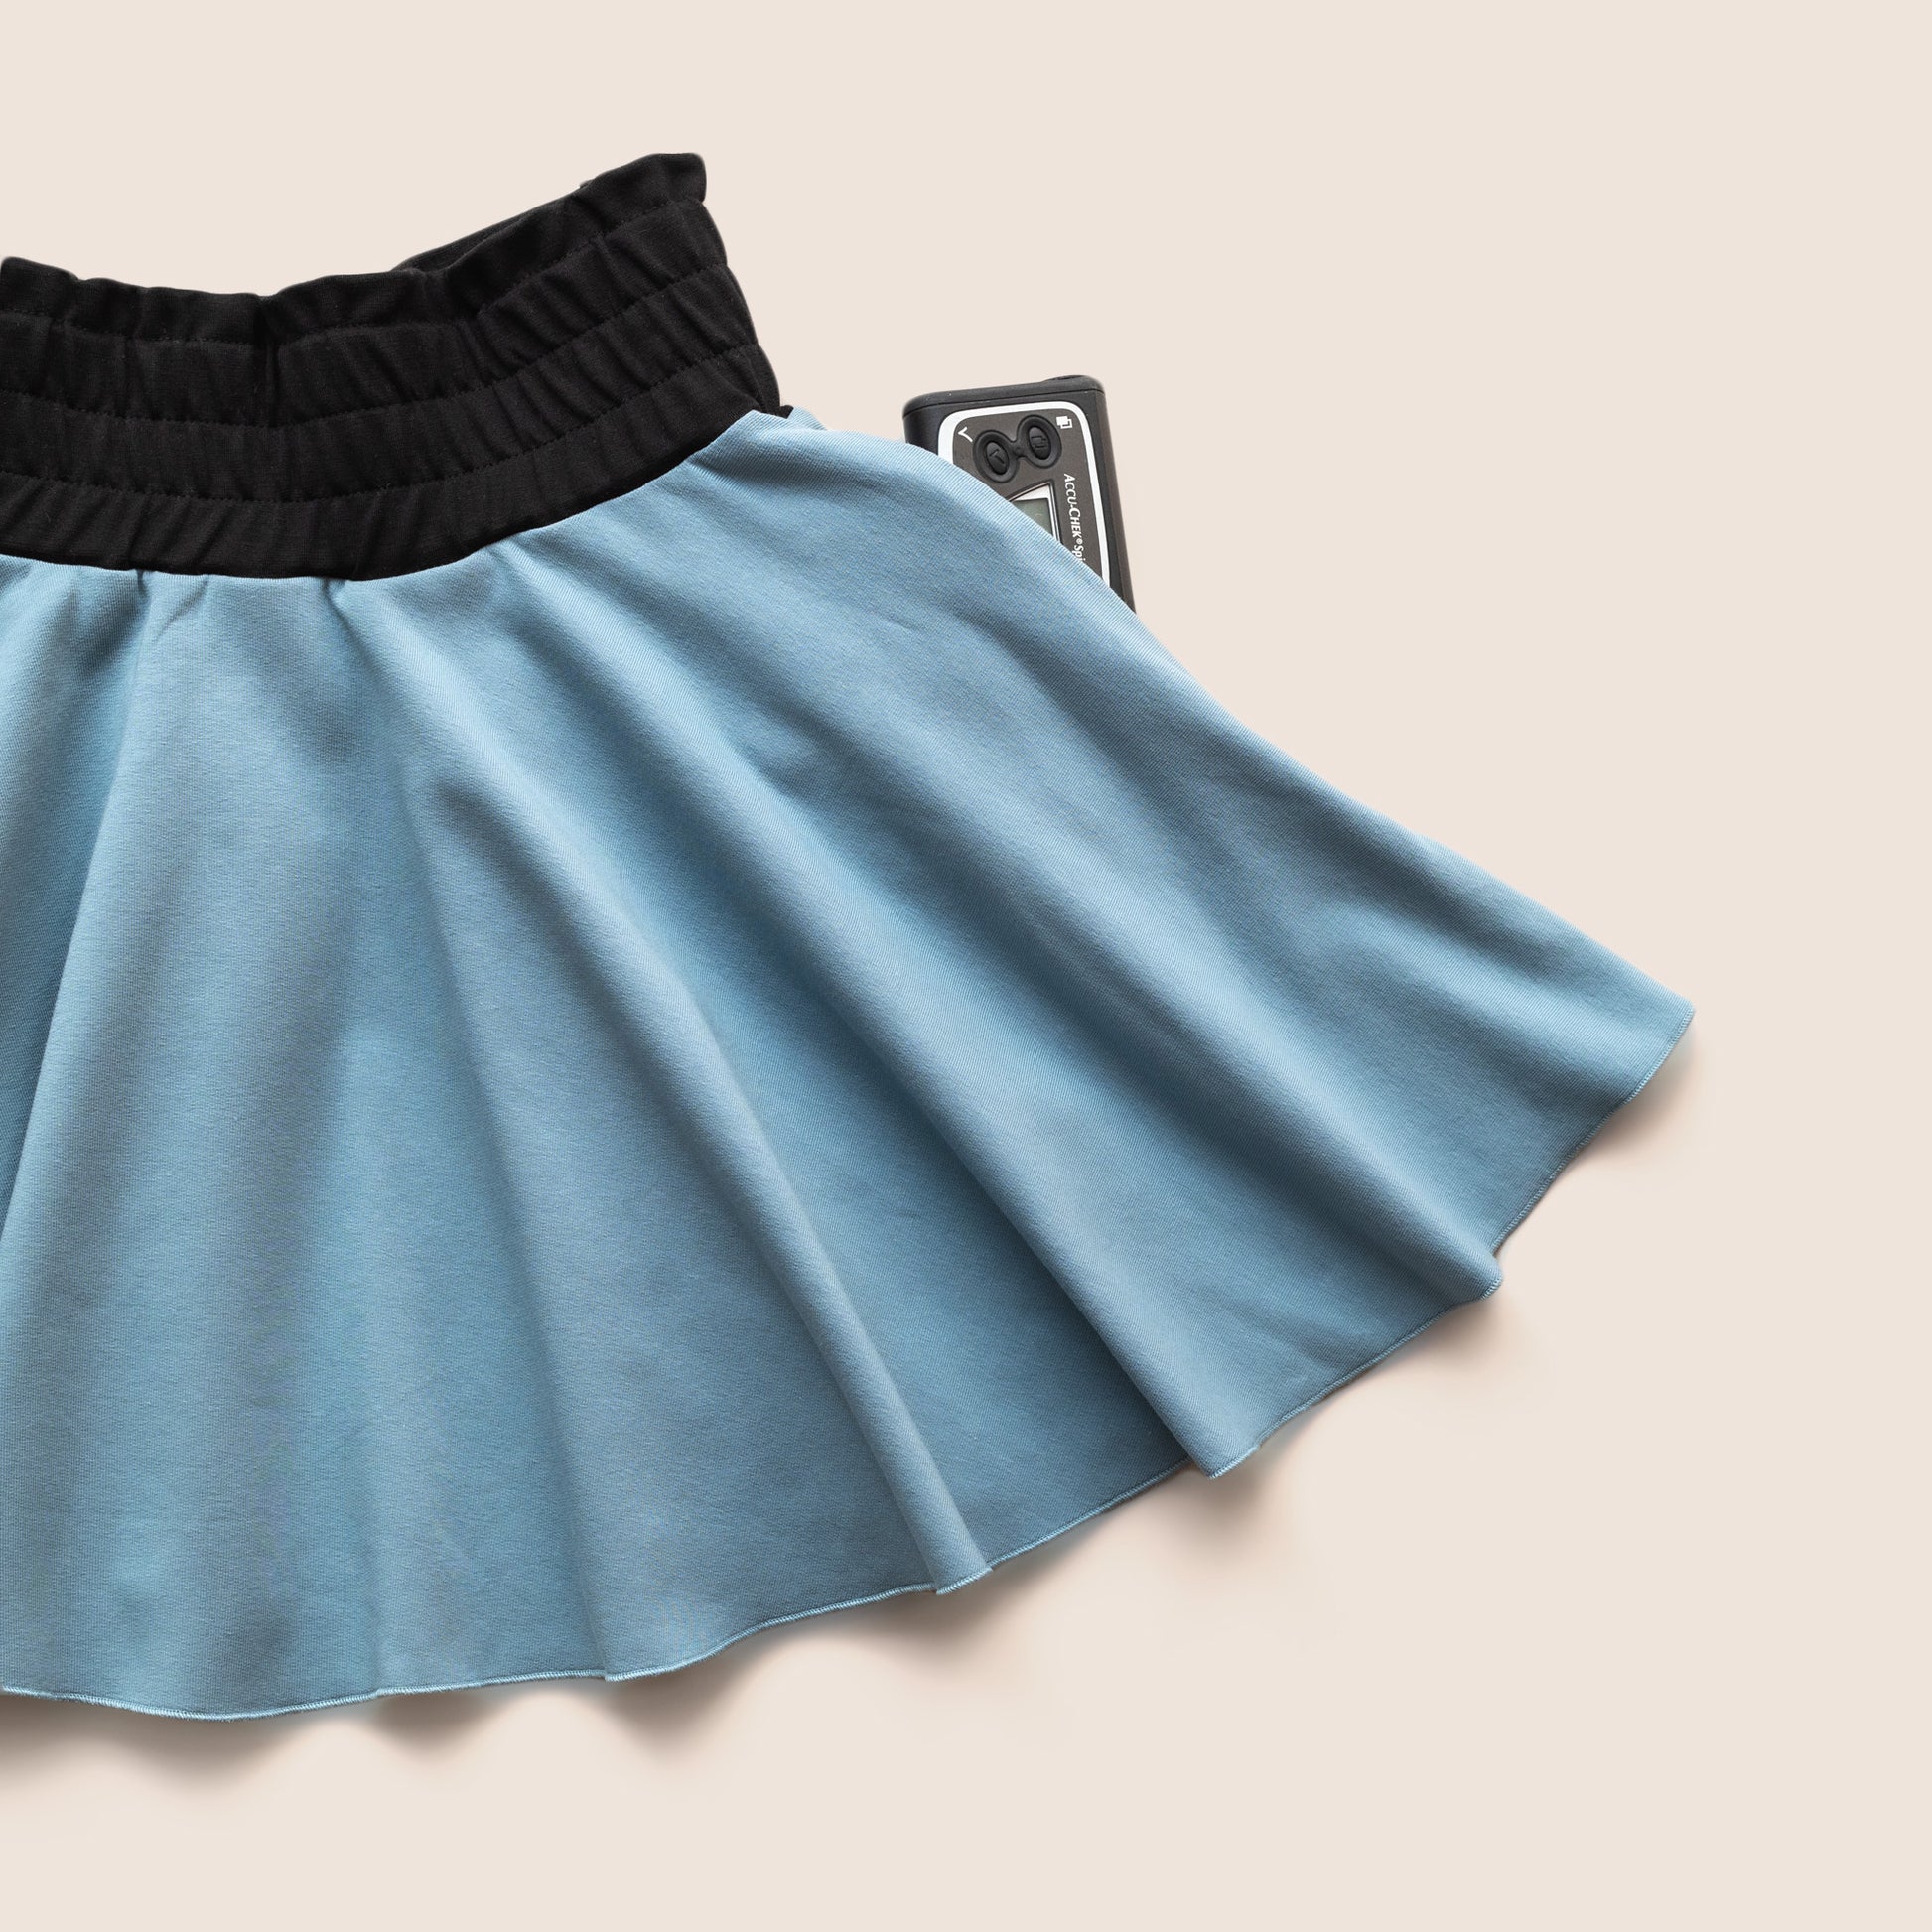 Type 1 Diabetes Clothing - Girls Skirt Sky Blue with pockets | Our Pocket Hero